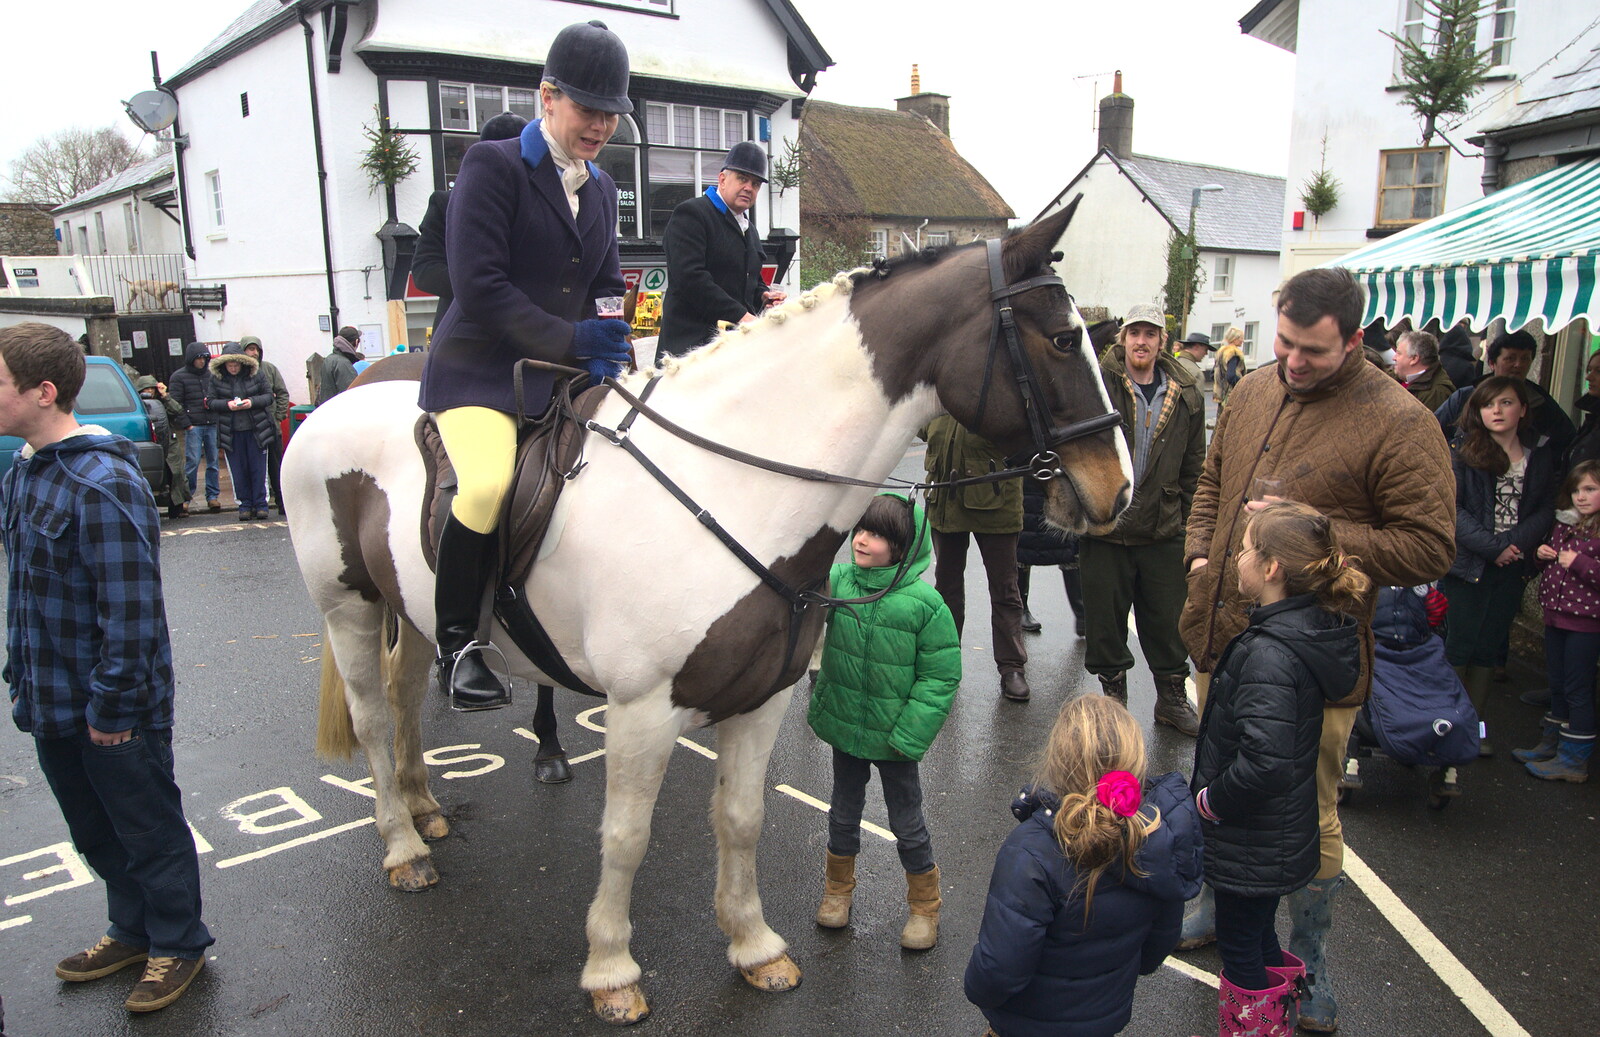 Children crowd around the horses from The Boxing Day Hunt, Chagford, Devon - 26th December 2012